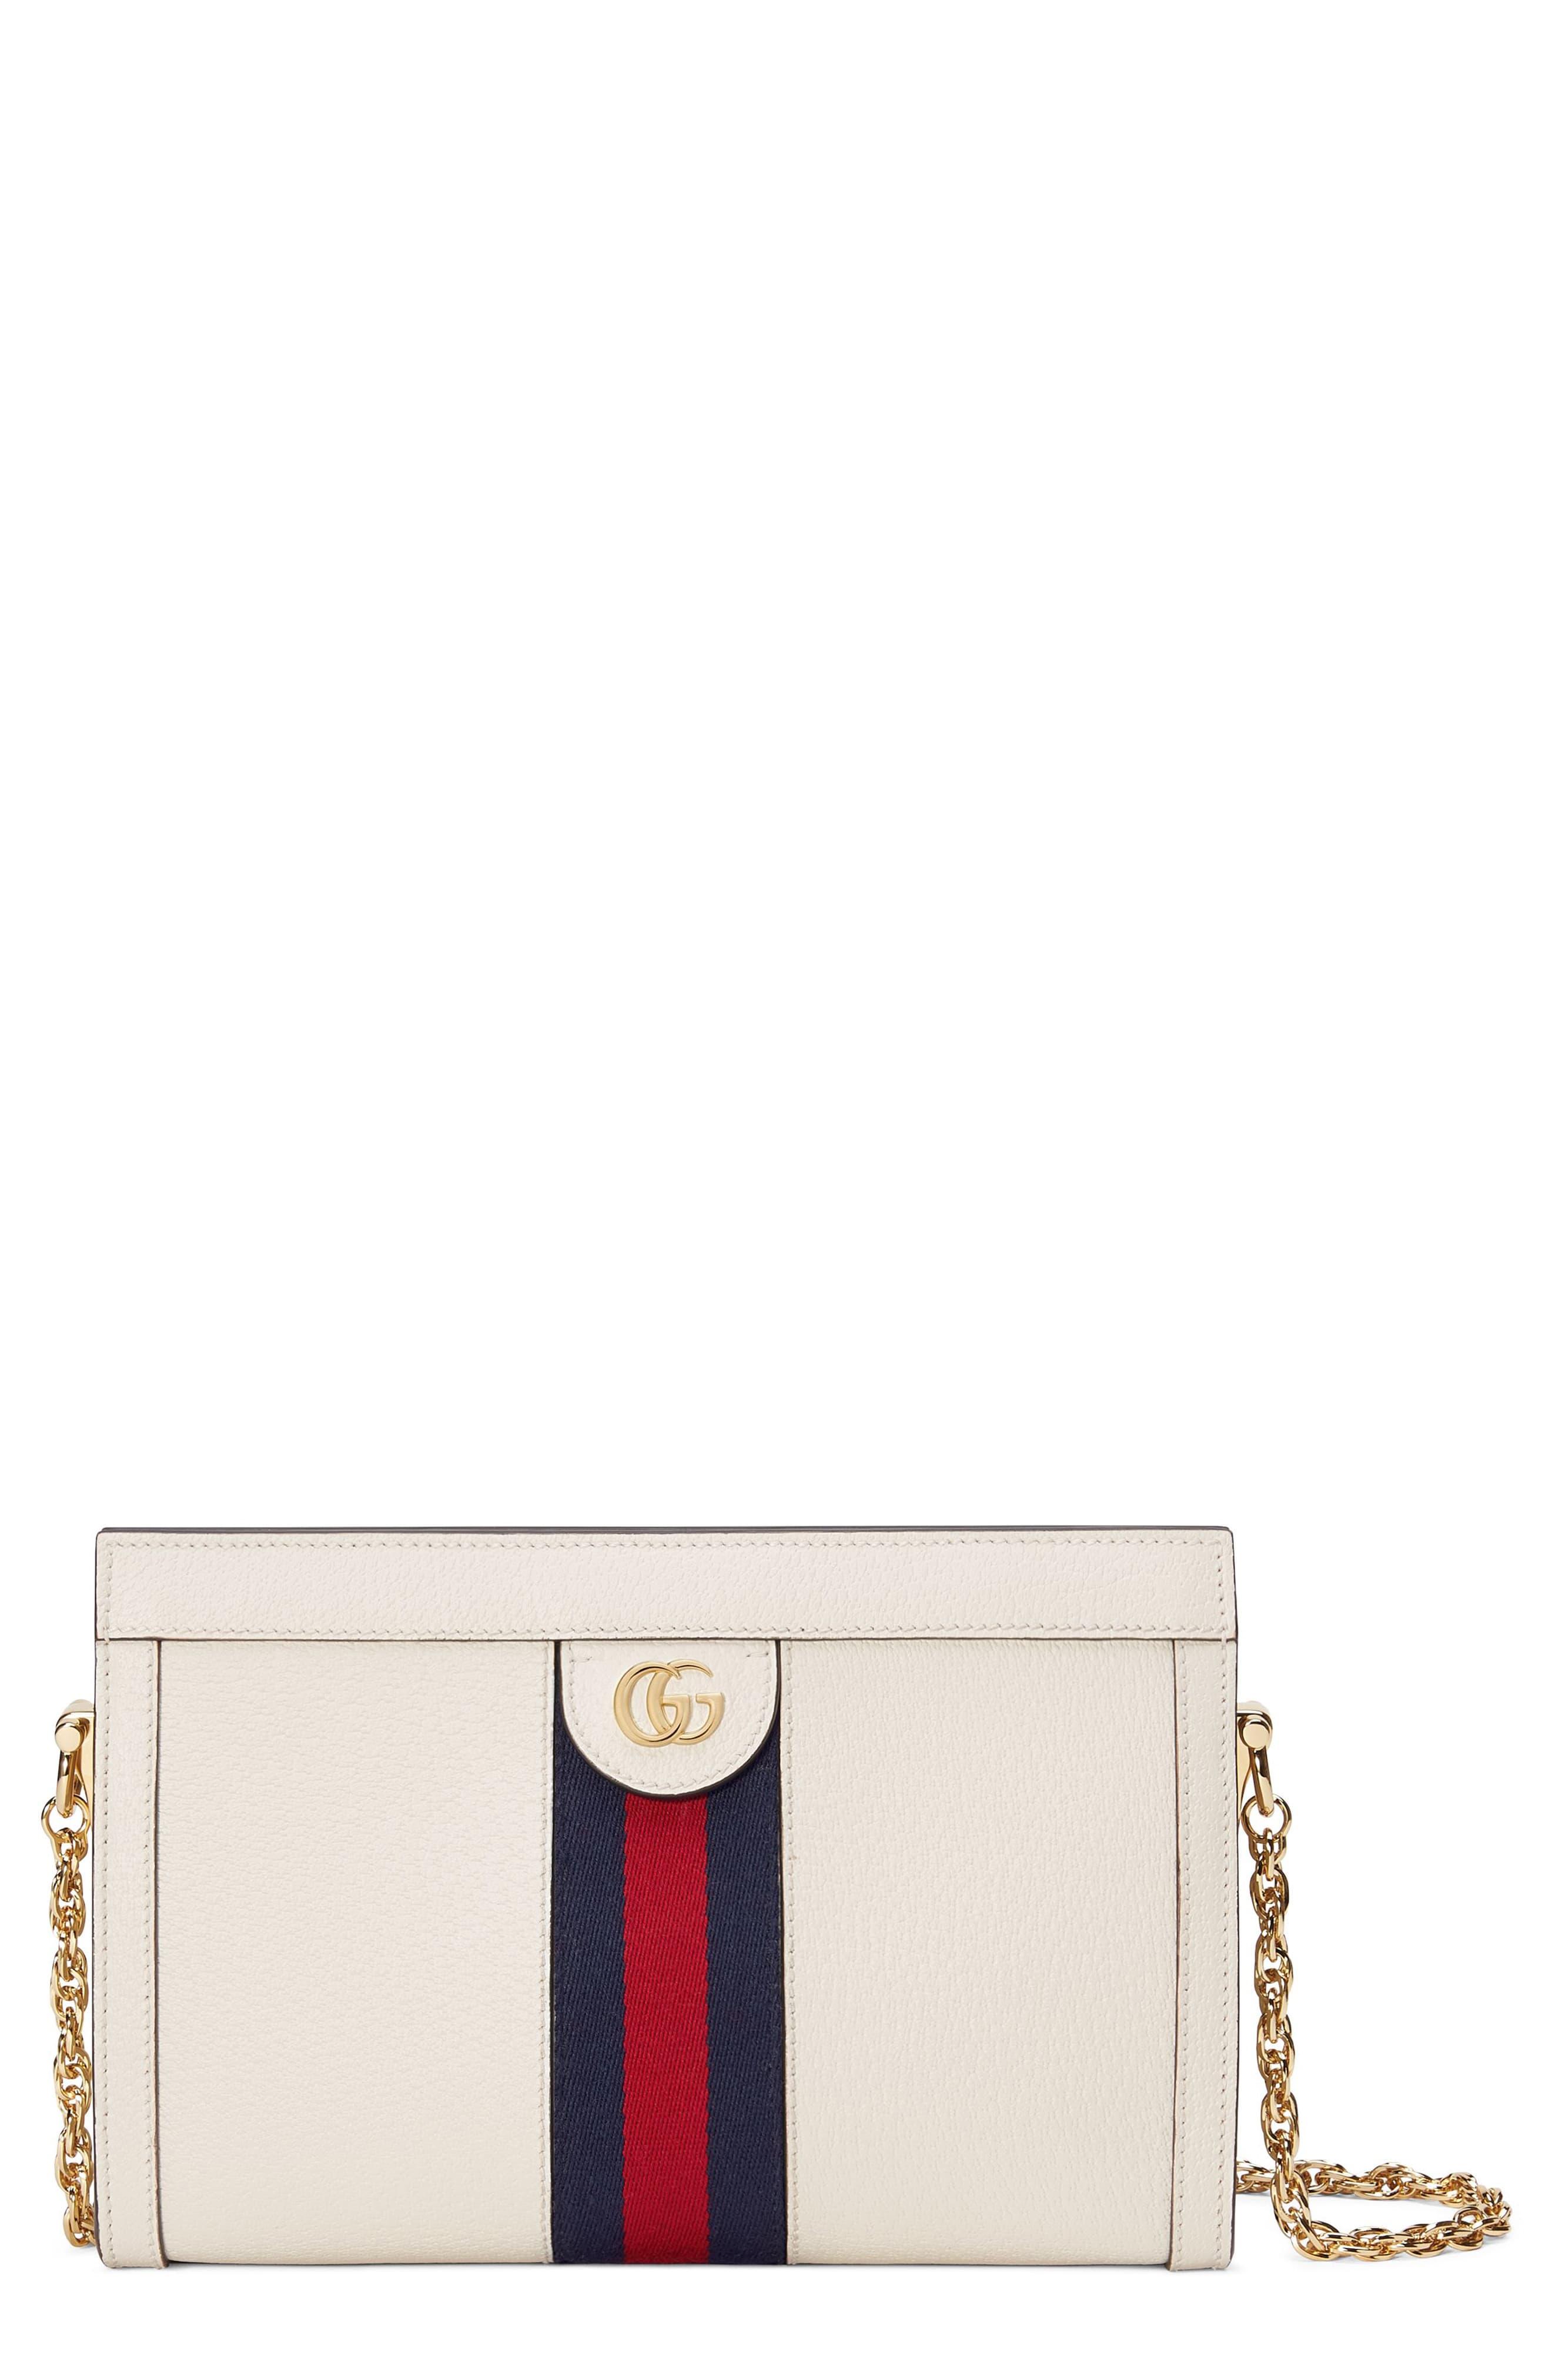 Gucci Small Ophidia Leather Shoulder Bag - Lyst